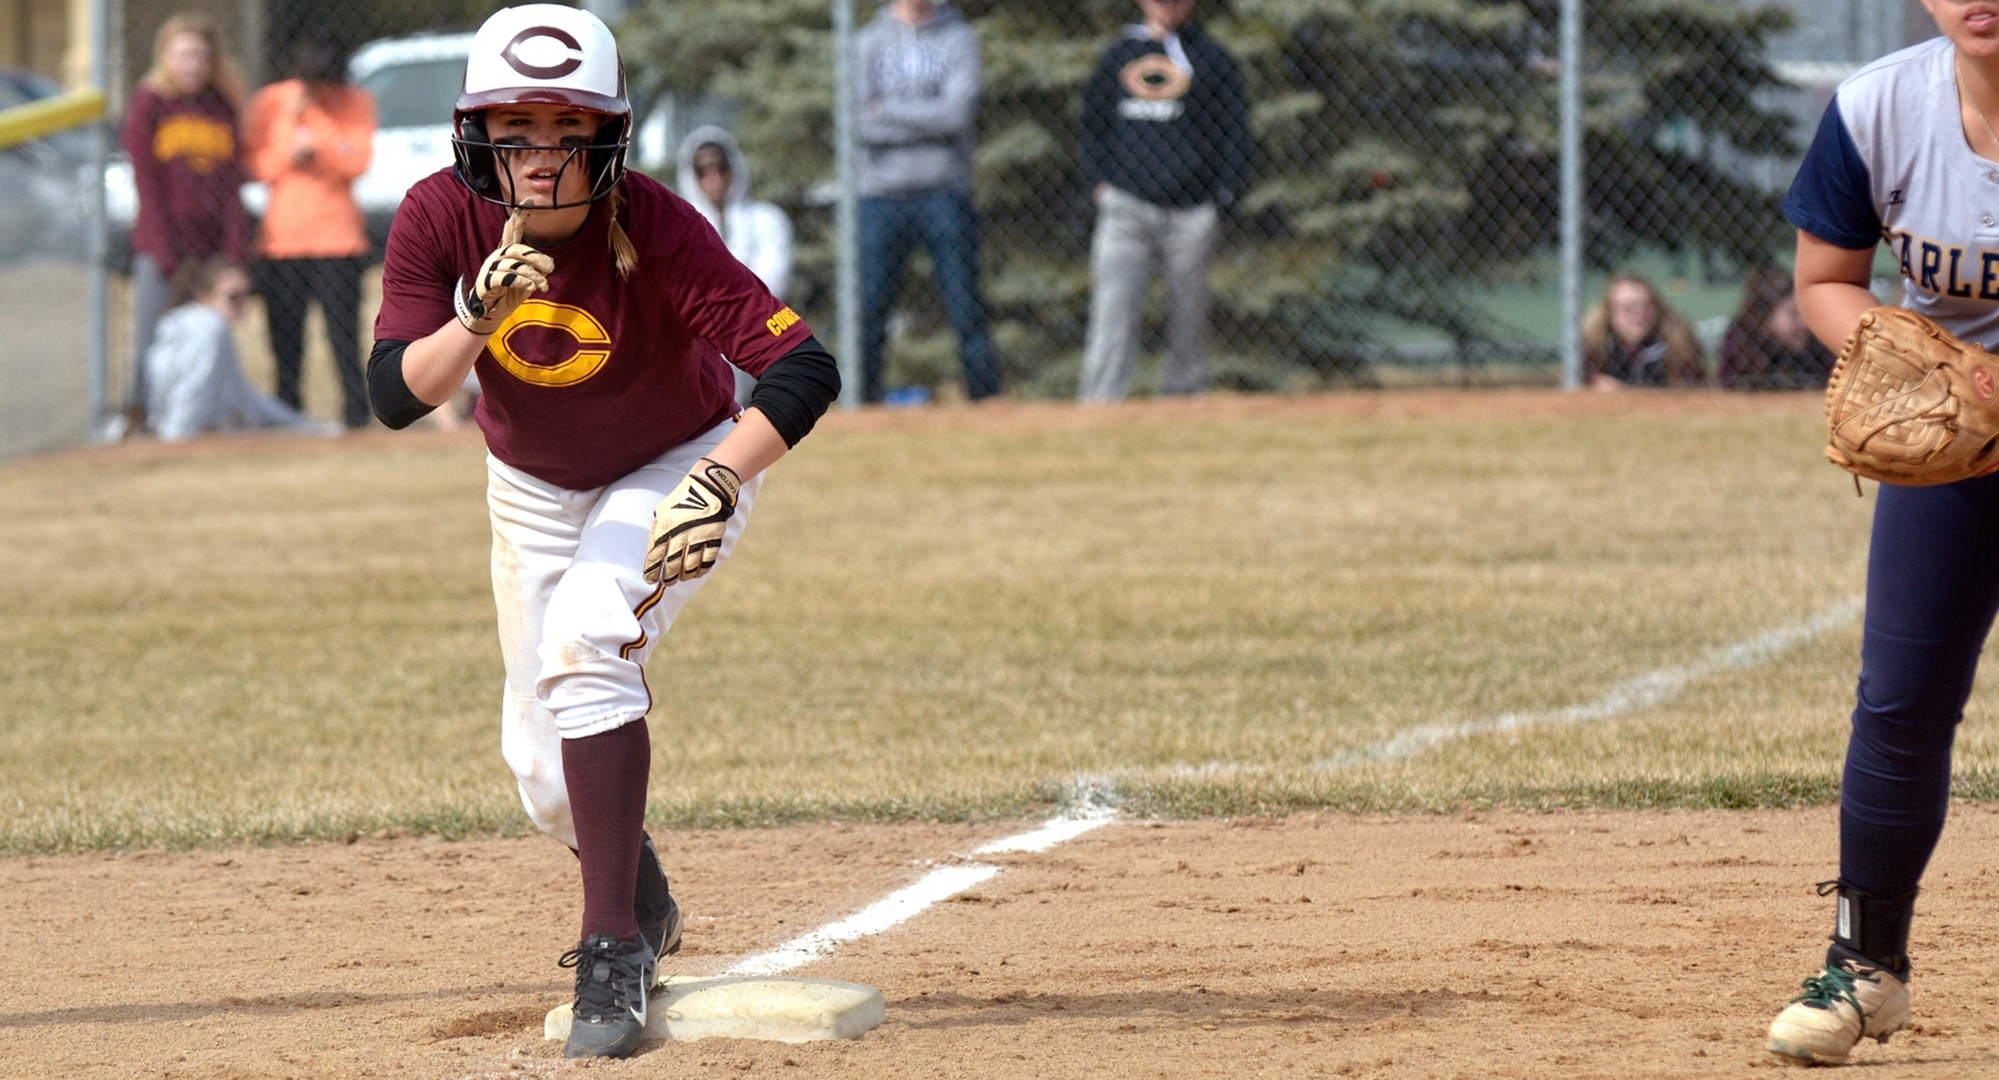 Cora Zackrison gets ready to take a lead off third base during the Cobbers doubleheader with Carleton.